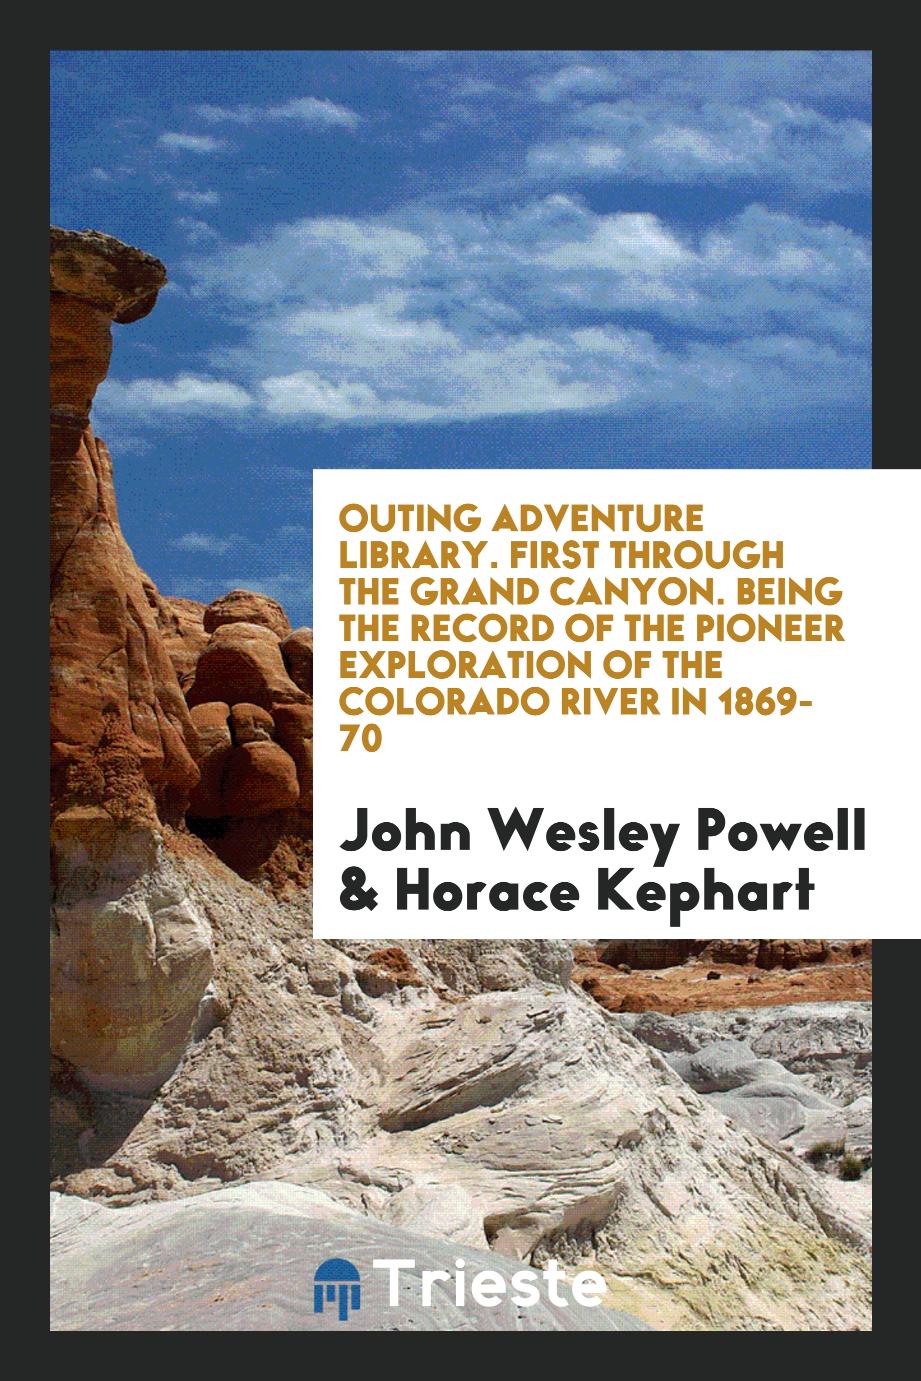 Outing Adventure Library. First Through the Grand Canyon. Being the Record of the Pioneer Exploration of the Colorado River in 1869-70